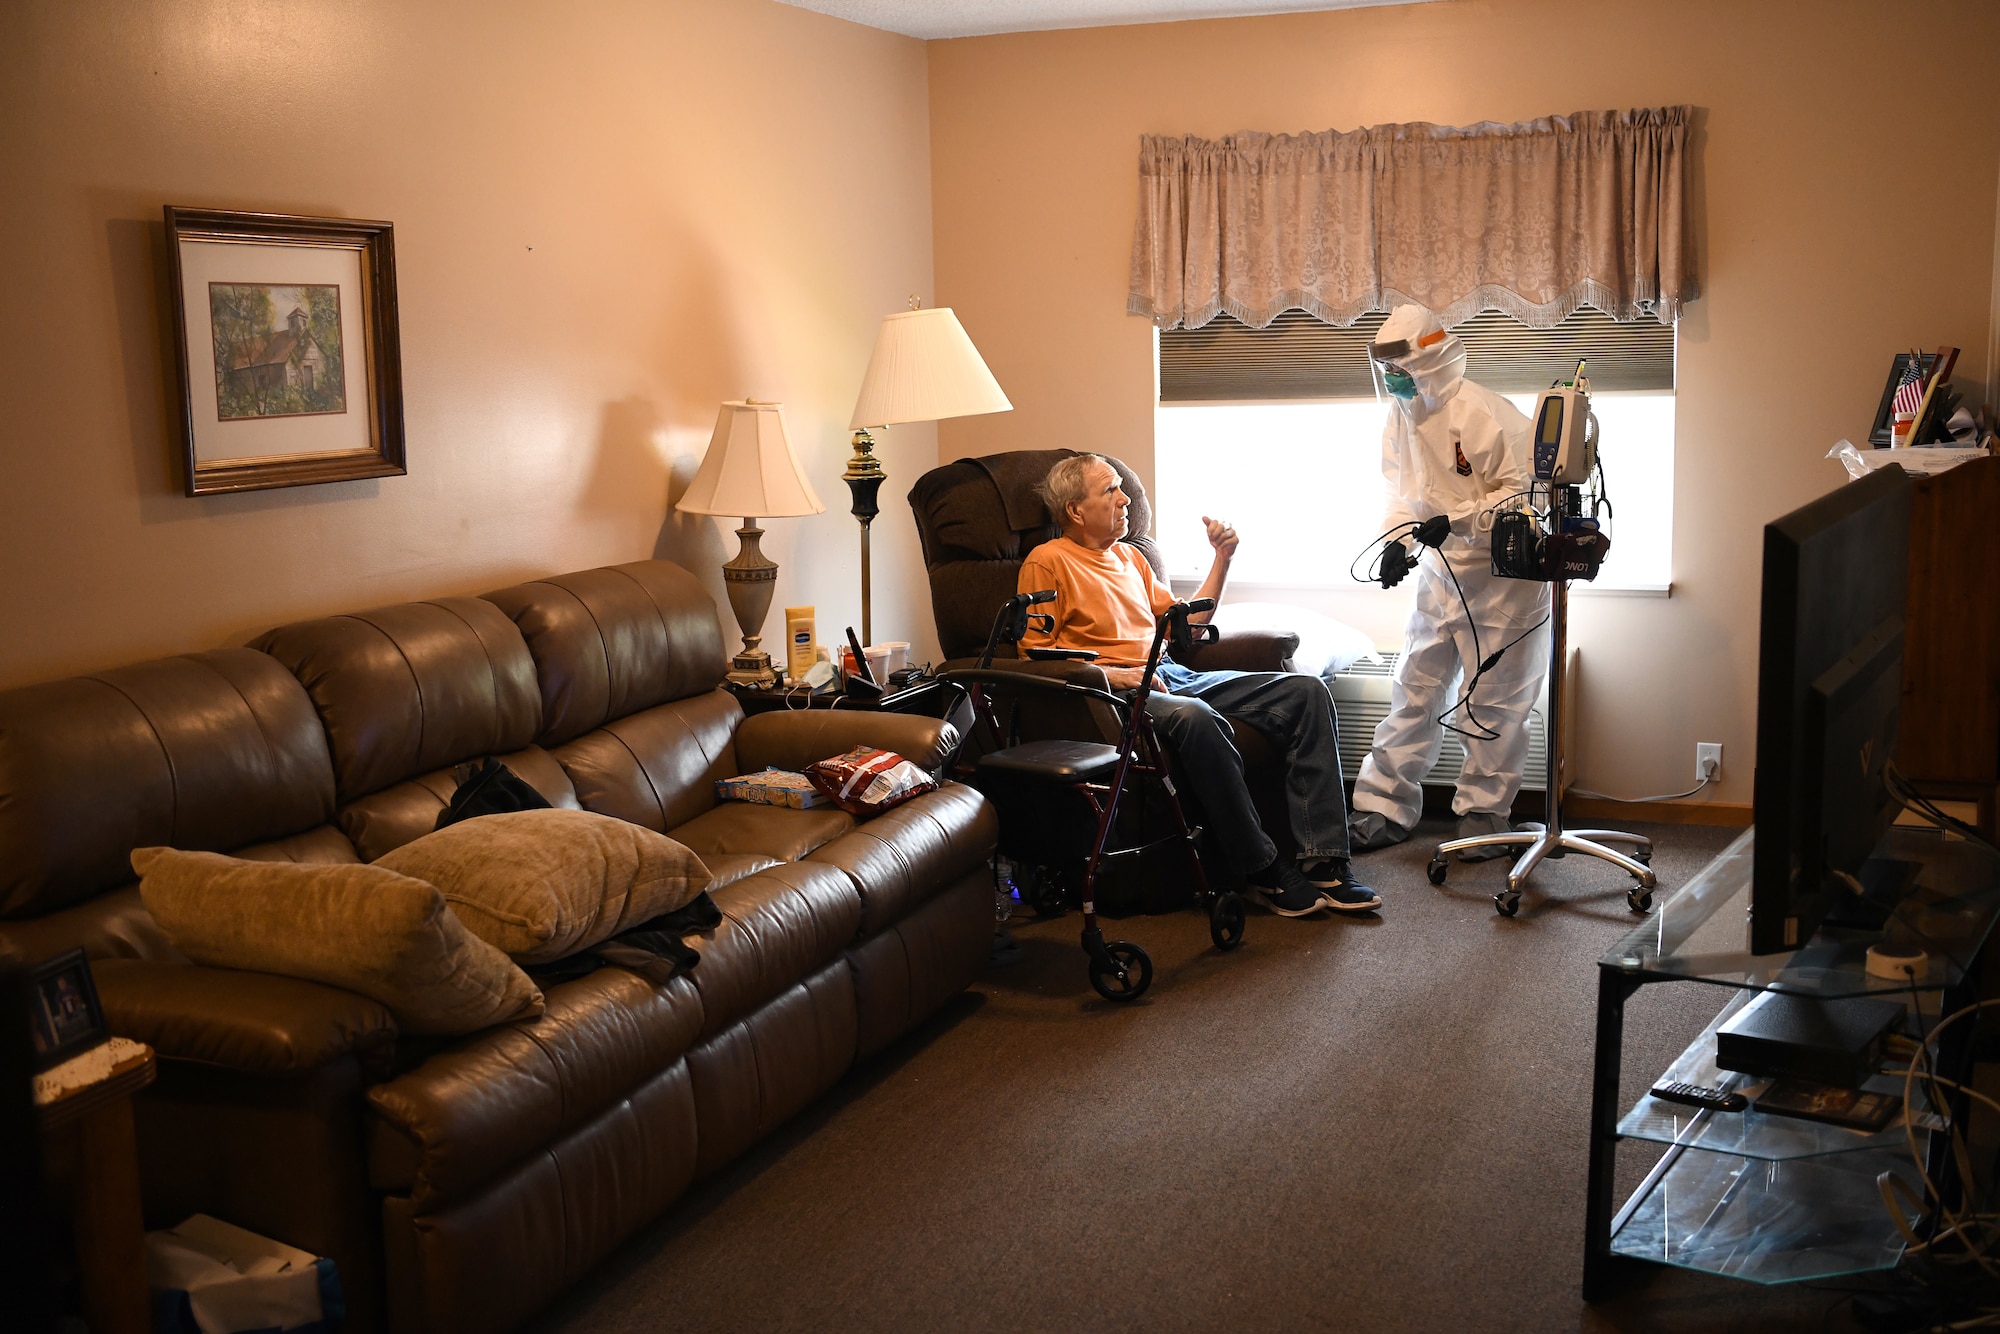 Staff Sgt. Kathryn Dobbs, an aerospace medical technician assigned to the 180th Fighter Wing, talks with an asymptomatic COVID-19 positive resident May 27, 2020, at the Carlin House in Logan, Ohio. Dobbs was part of a 20-person team of Ohio National Guard members who were tasked with helping at the assisted living facility after over half of their staff and residents tested positive for COVID-19. (U.S. Air National Guard photo by Staff Sgt. Amber Mullen)